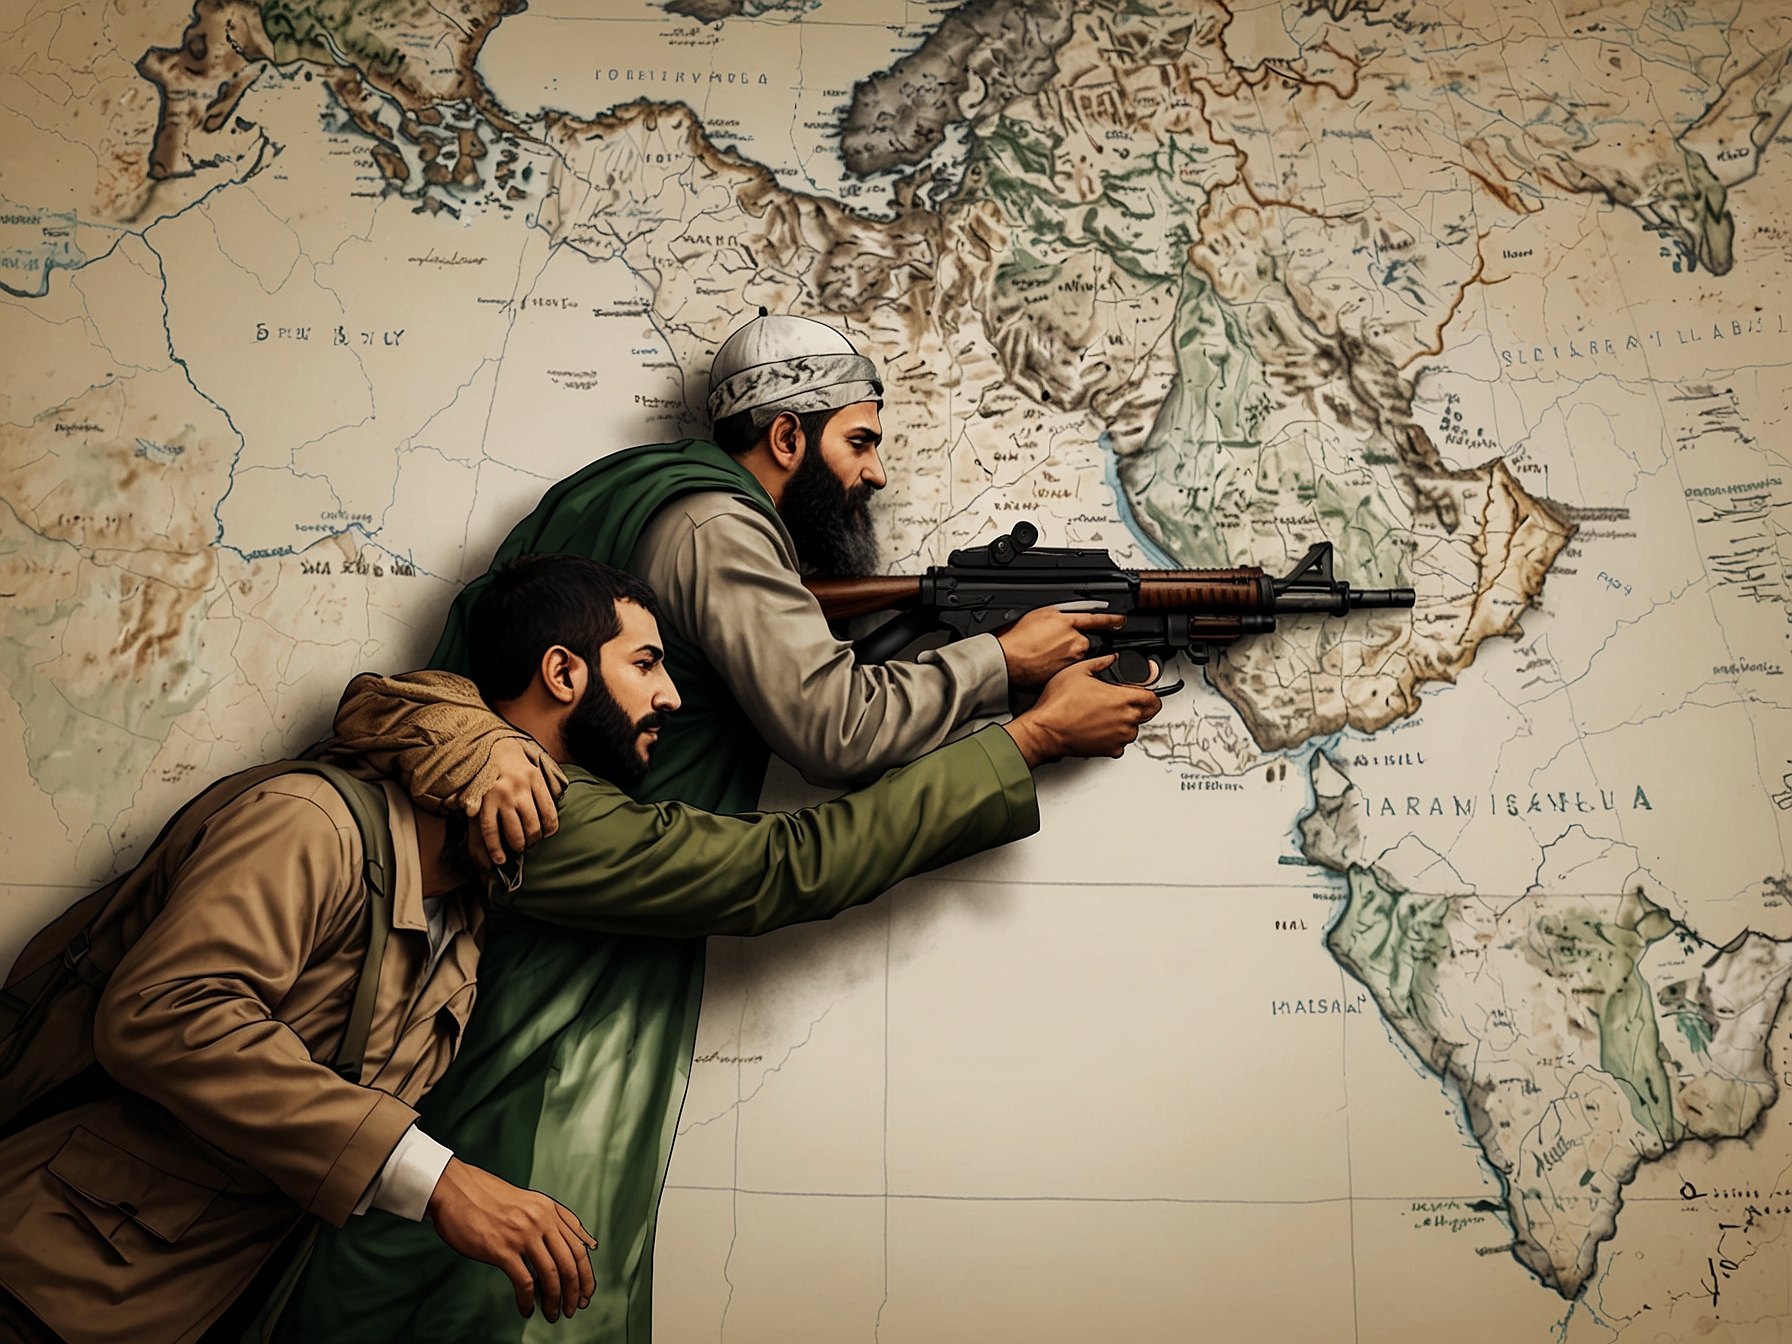 A depiction of the geopolitical landscape involving Israel and Hamas, showcasing the various regional actors, such as Iran, that support Hamas with financial and military aid, which influences the conflict.